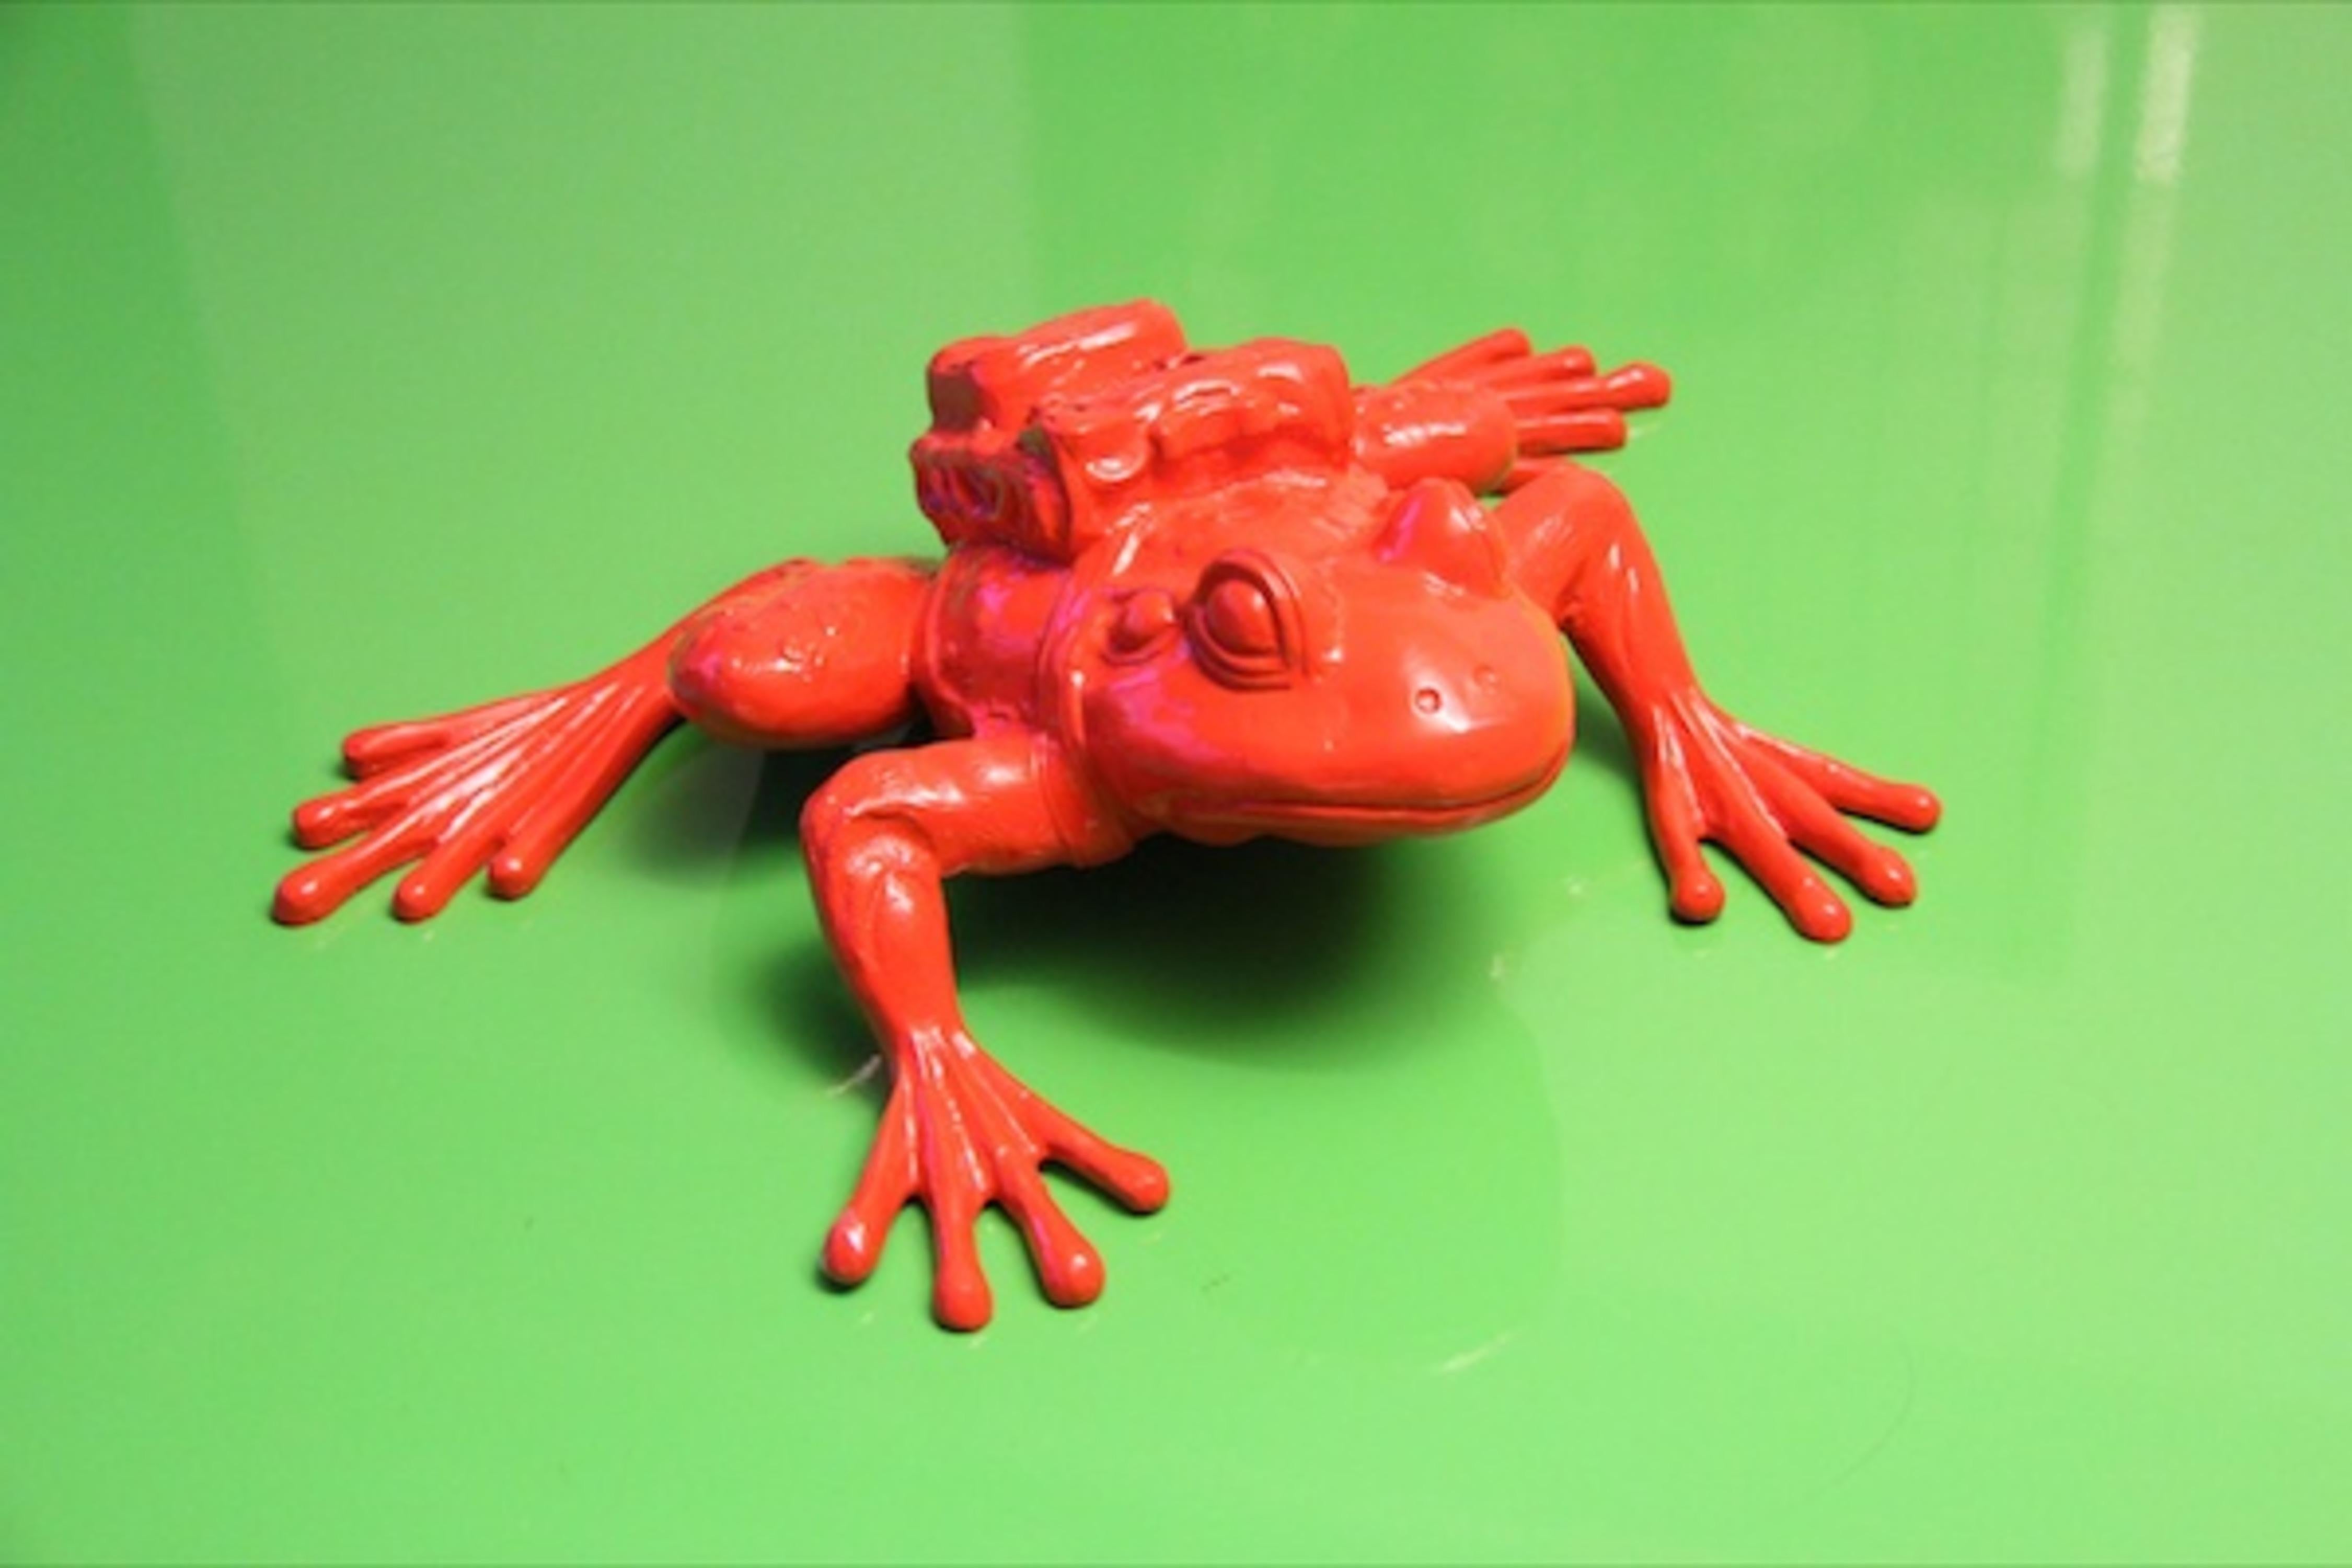 Cloned RED Aluminum FROG with backpack - Sculpture by William Sweetlove